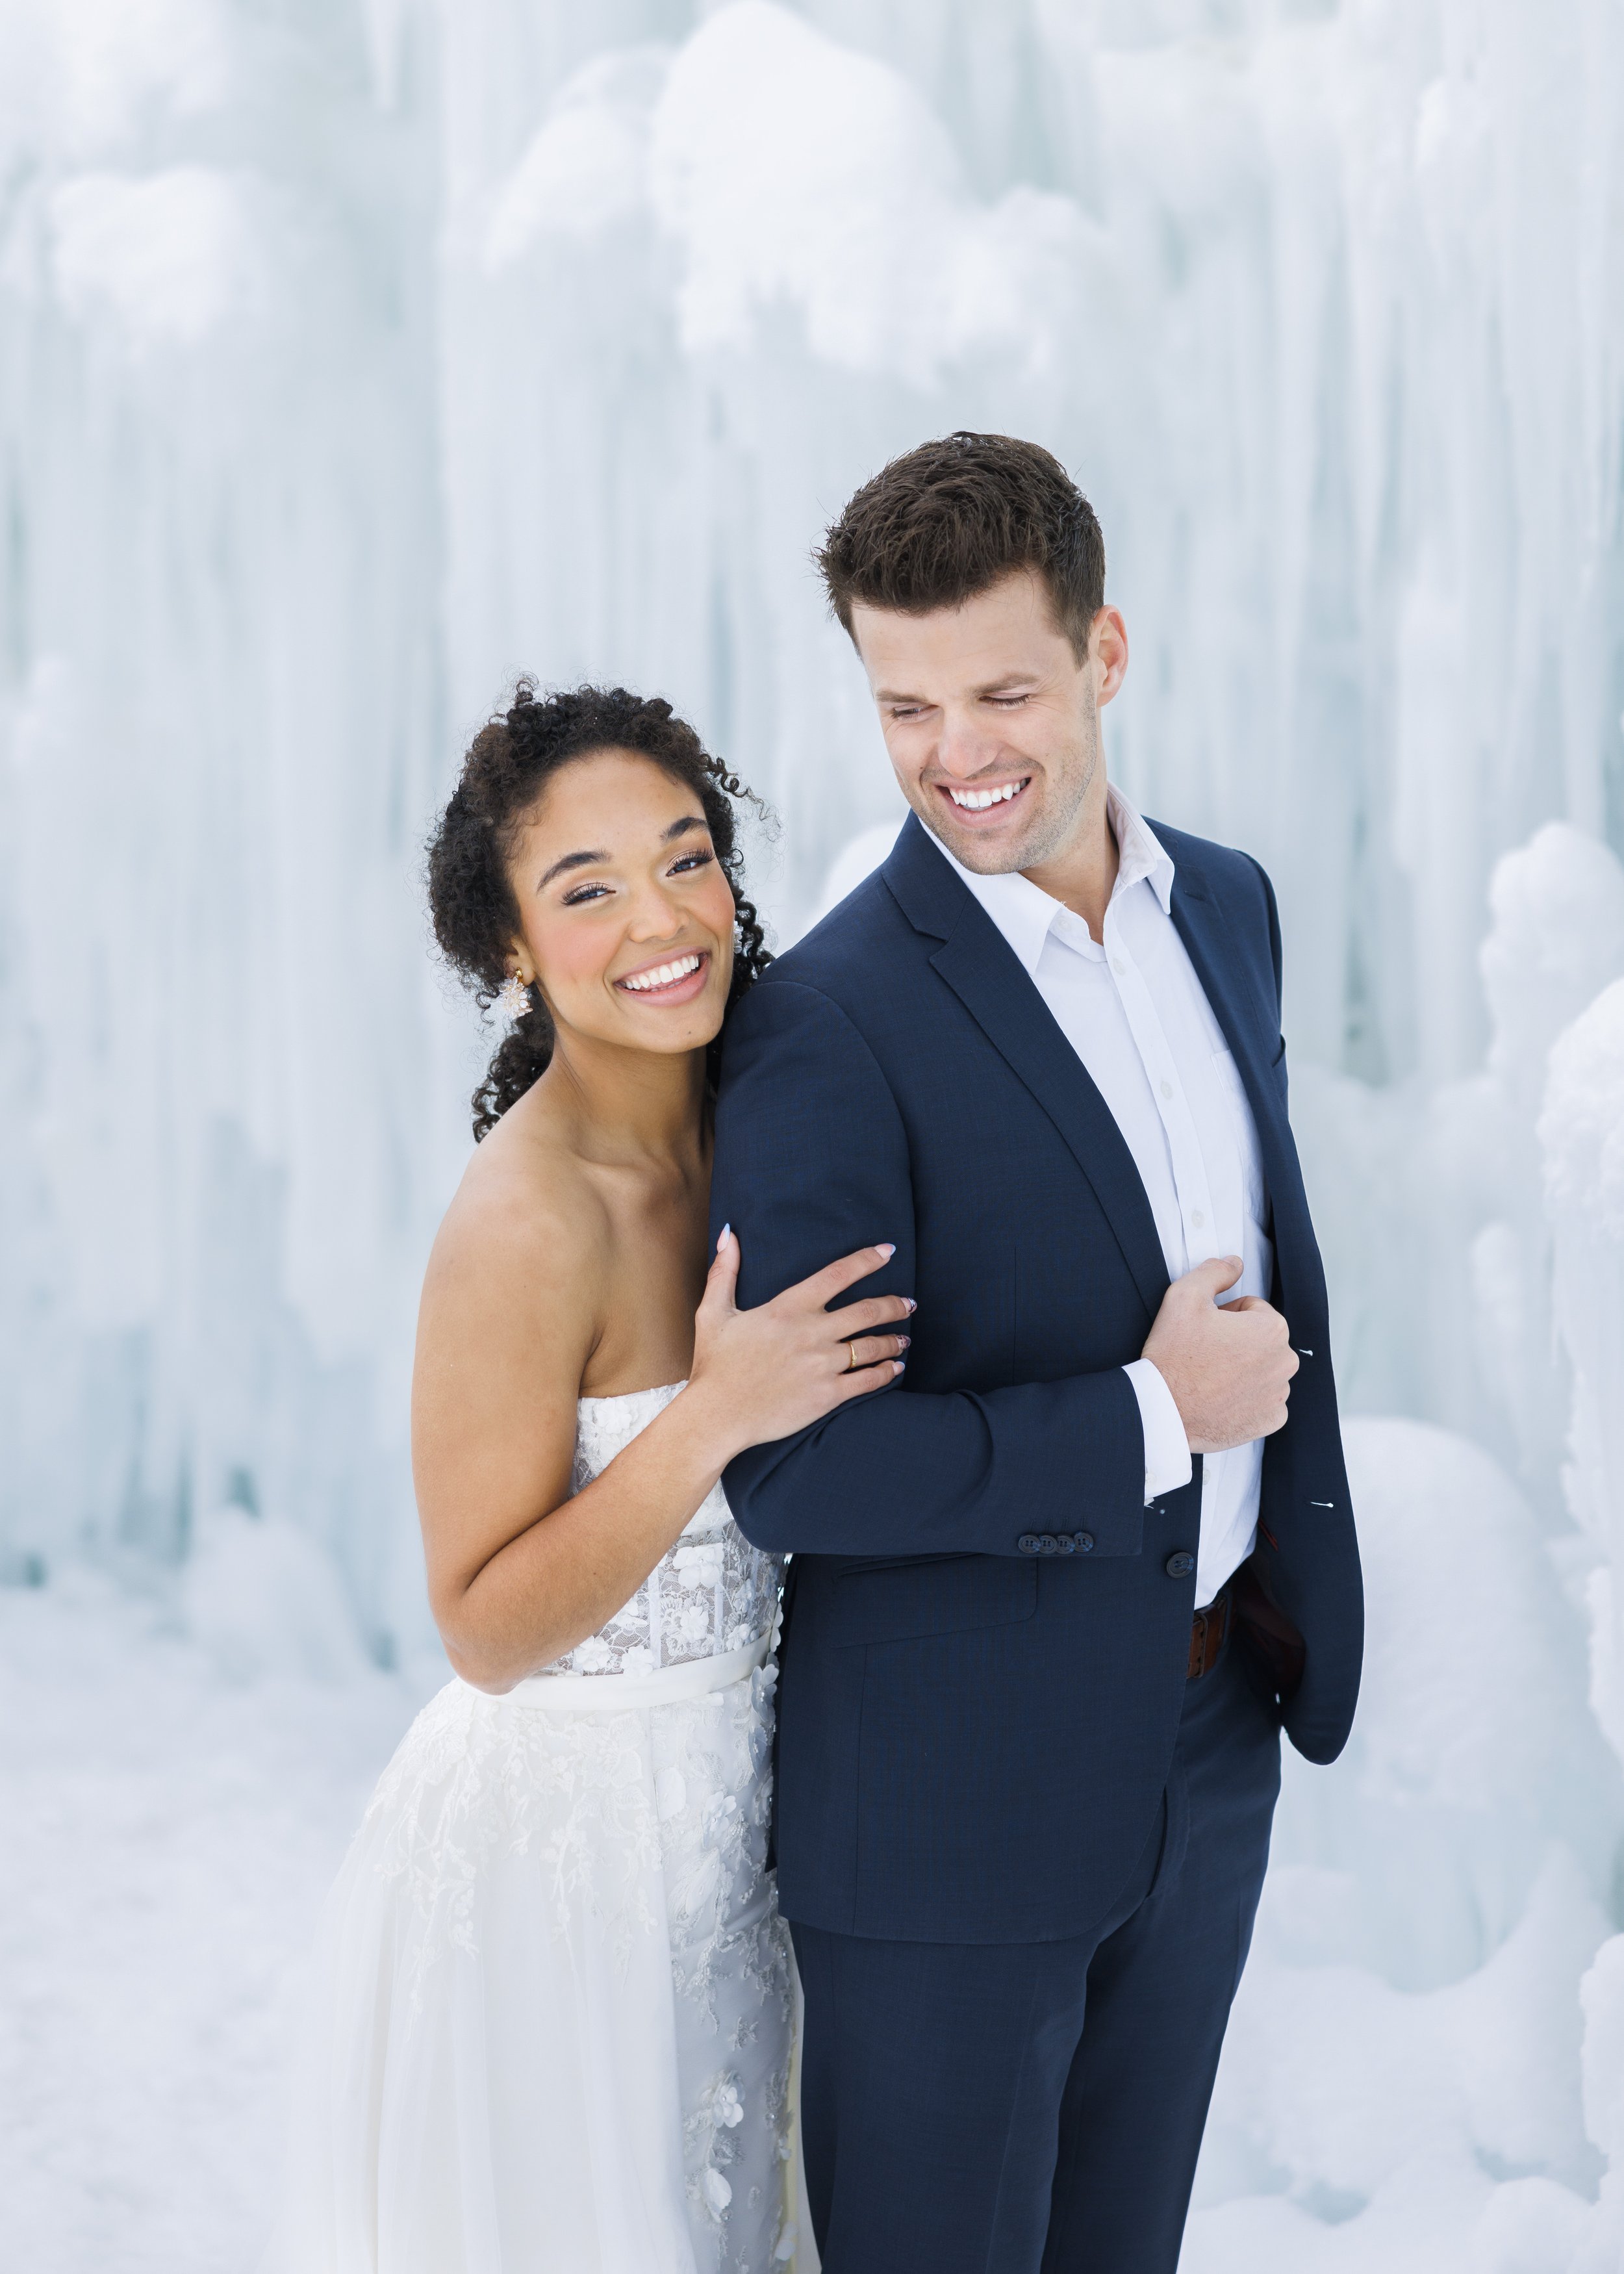 2301-03 Ice Castles Styled Bridals_05123.jpg